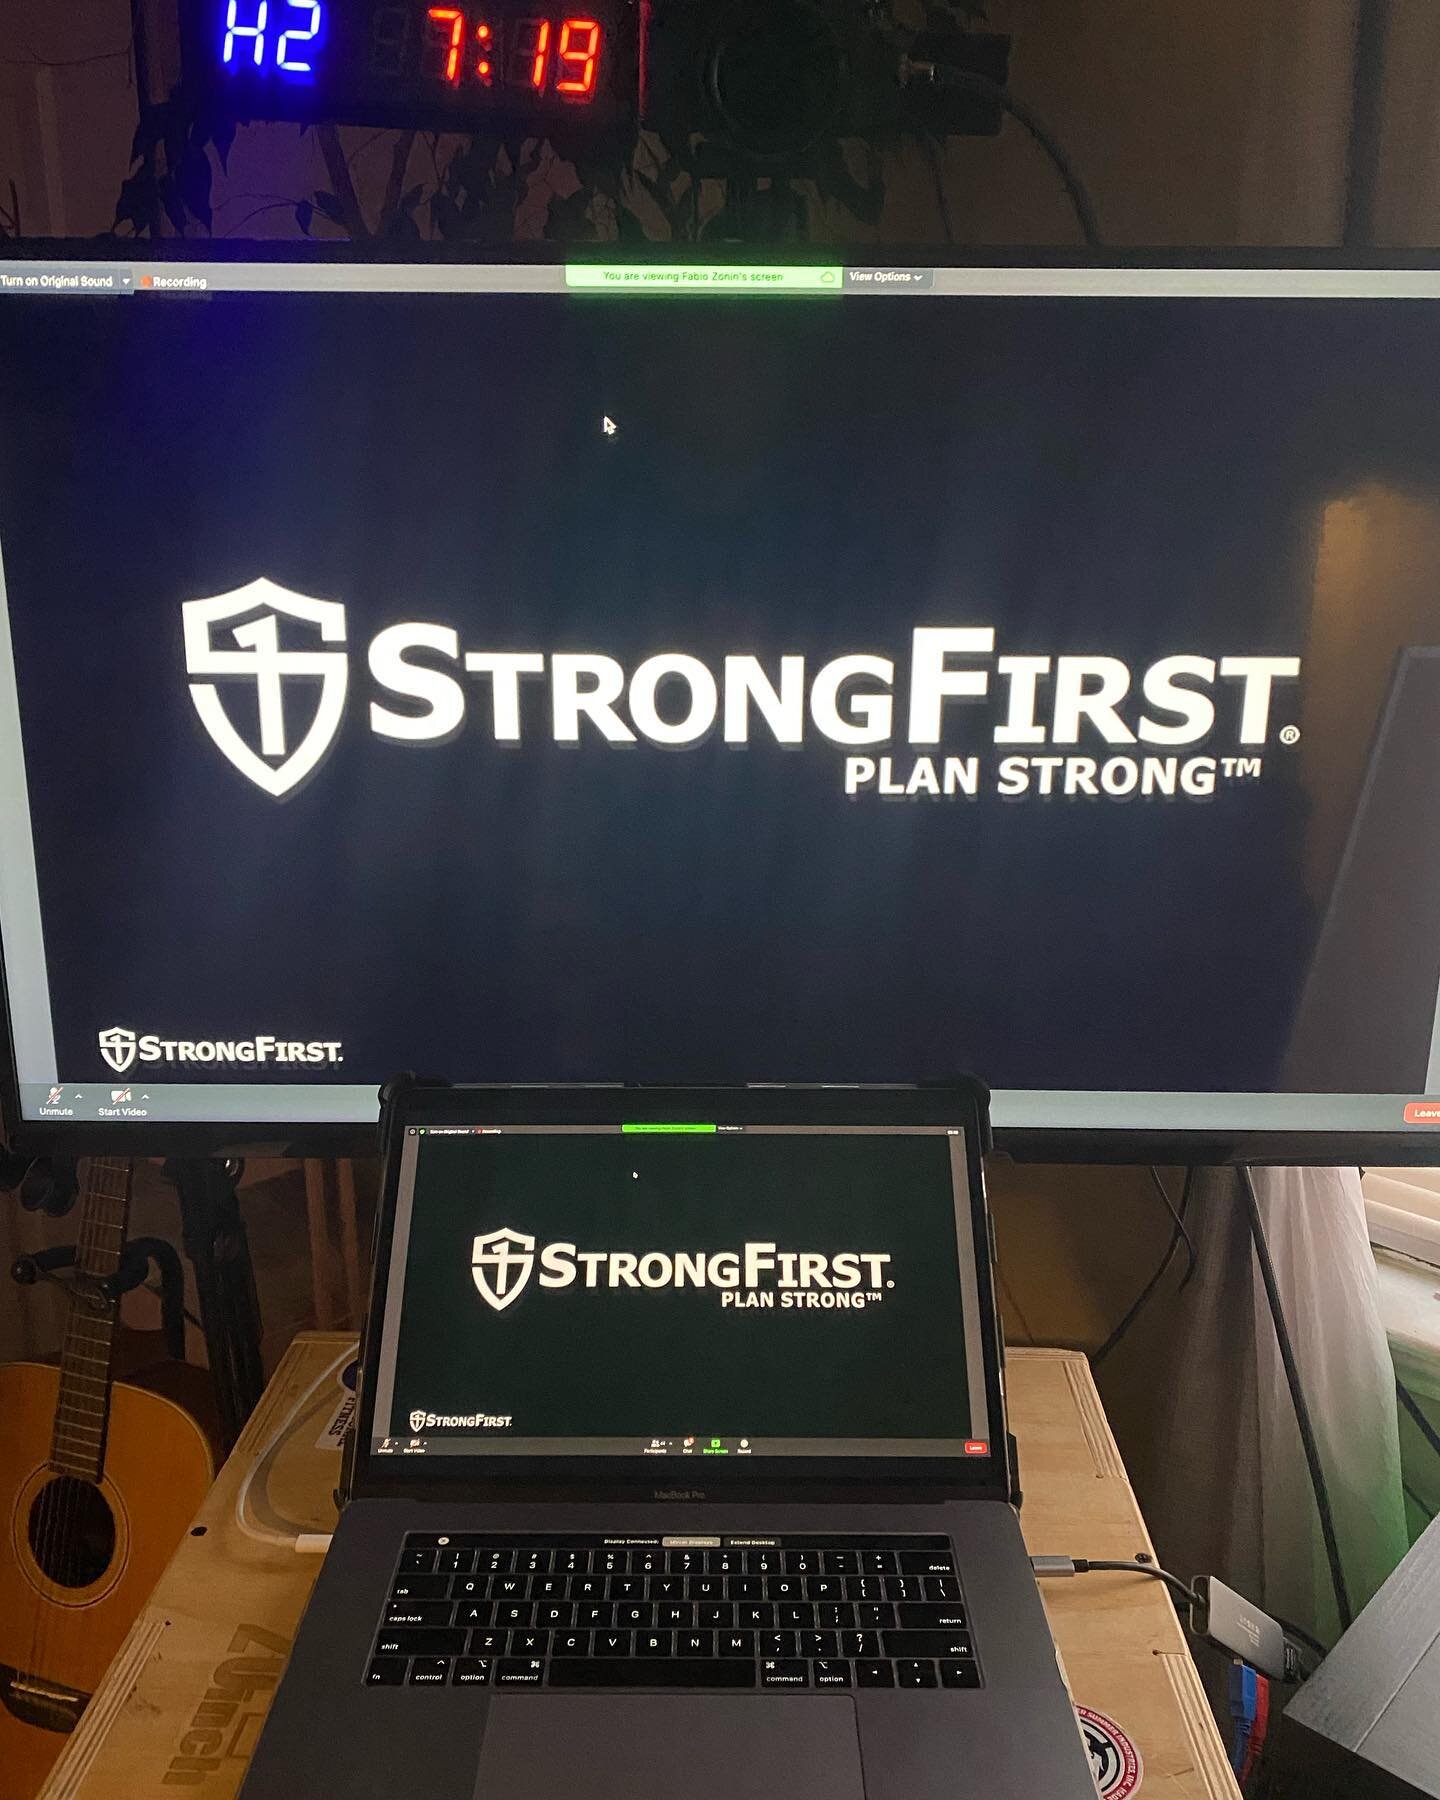 Stoked to learn from @x_fab_69 this weekend for the @strongfirst Plan Strong 😎💪🤘
.
.
#strongfirst #alwayslearning #trainsmart #remotelearning